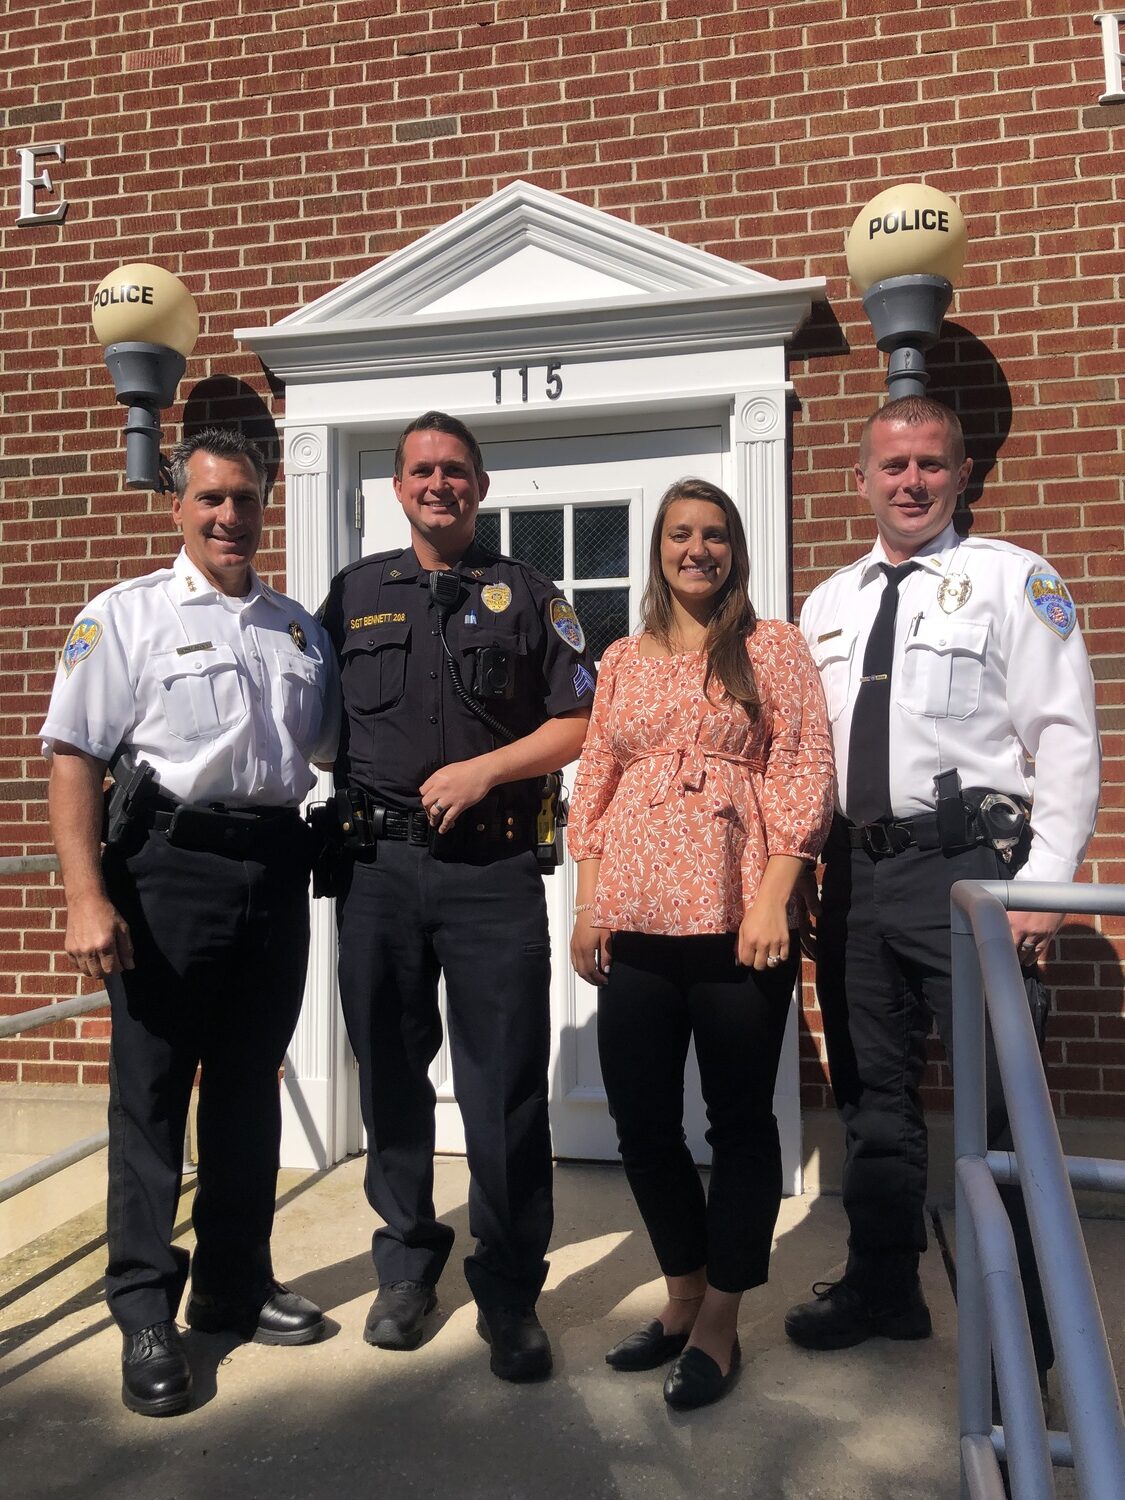 From left, Quogue Police Chief Chris Isola, Sergeant Daniel Bennett, officer Ashleigh Trotta and Lieutenant Daniel Hartman worked together to make sure the Quogue Police Department met the necessary standards to officially become an accredited police department in the state of New York. CAILIN RILEY